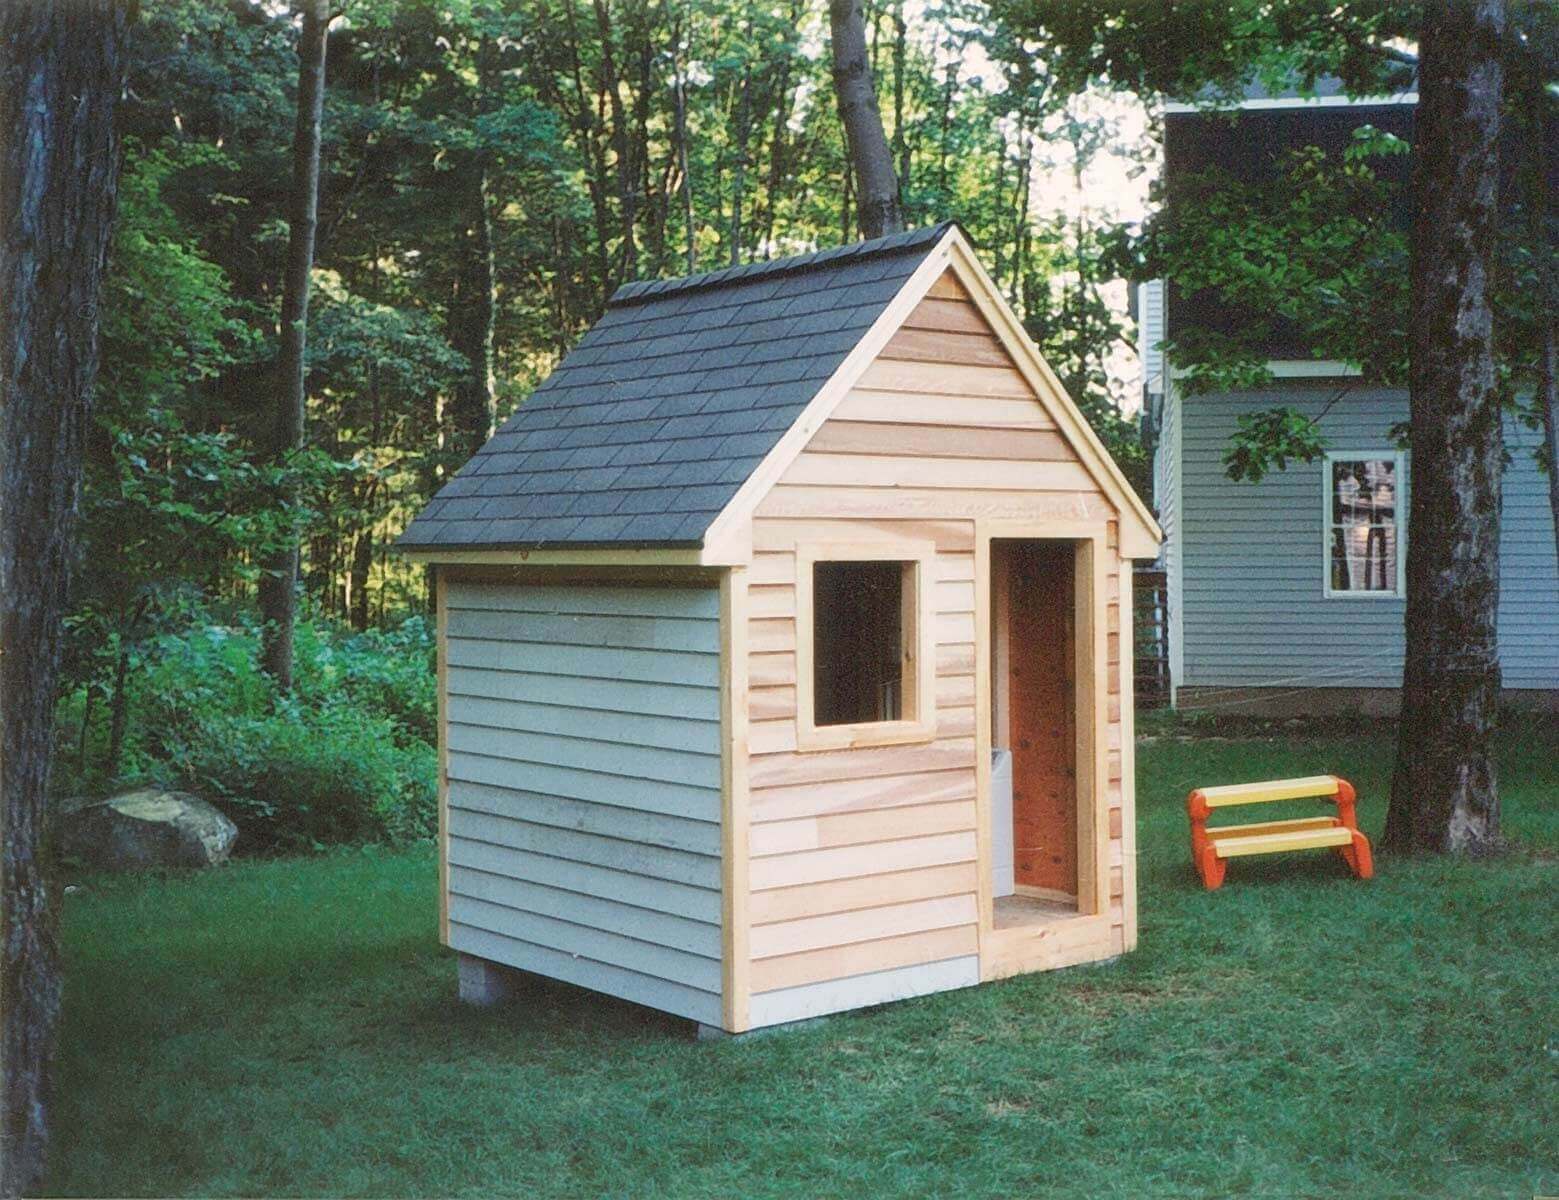 Children's playhouse with real wood siding and shingled roof. Open door and window.